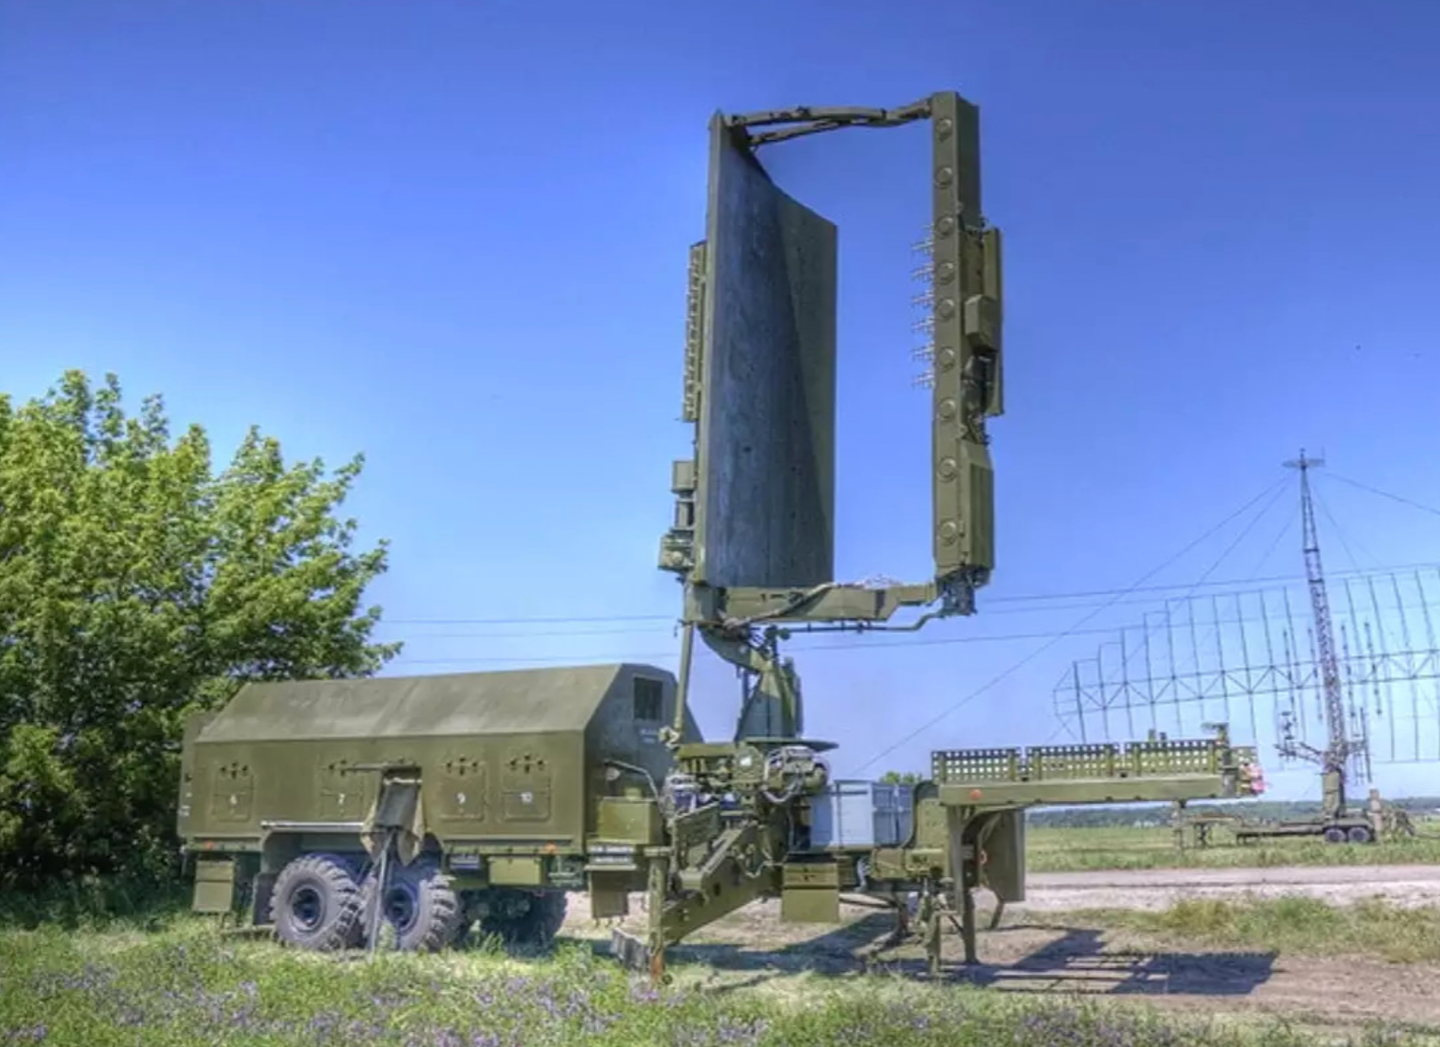 In 2018, the U.S. Army reportedly took delivery of one of a Ukrainian 36D6M1-1 air defense radar, an example of which is seen here and that is associated with the S-300 surface-to-air missile system. <em>UKROBORONPROM</em>